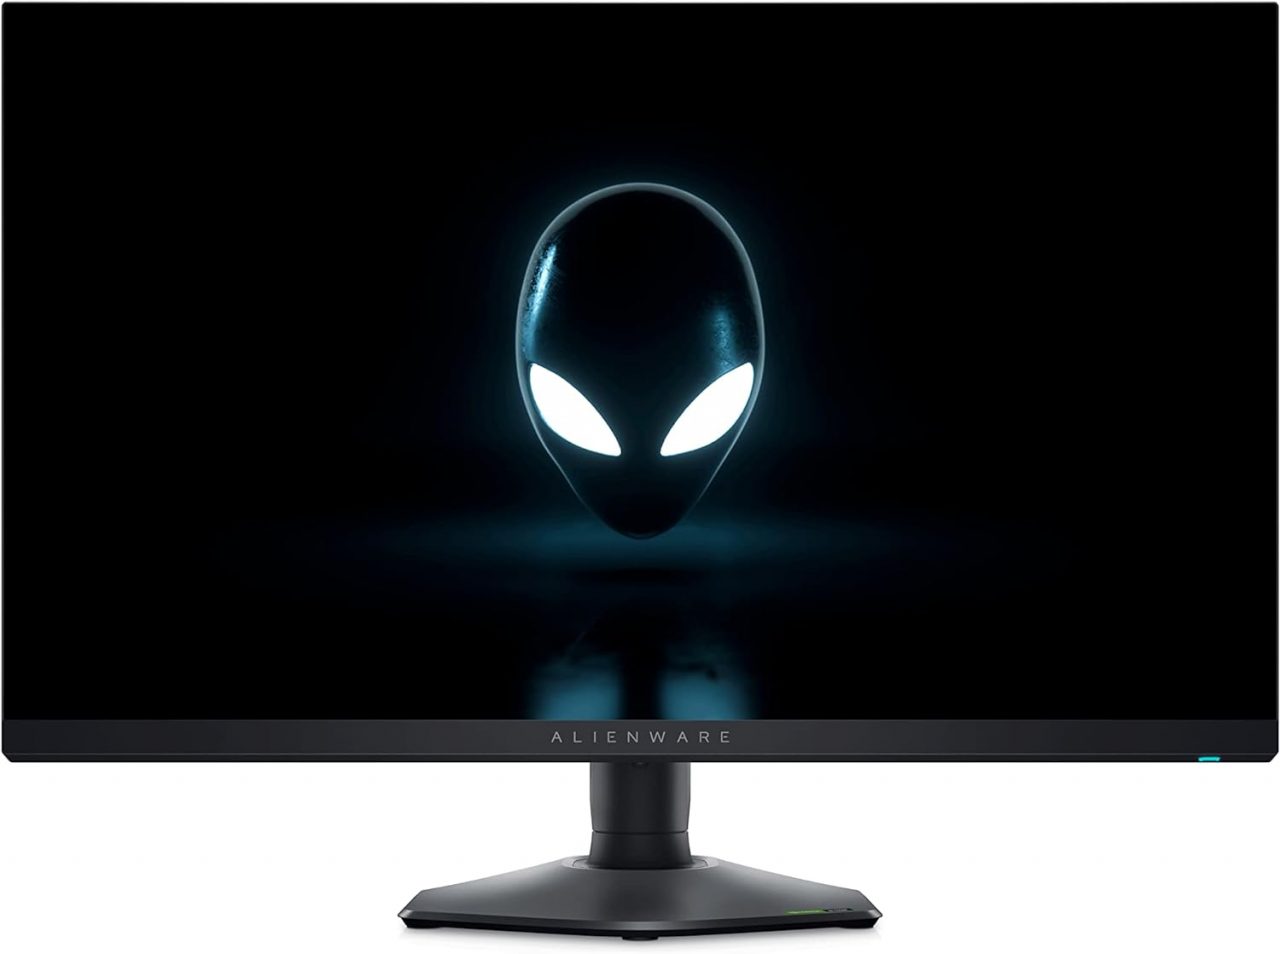 Displayspecifications com. Alienware 34 Curved QD-OLED Gaming Monitor (aw3423dw. 34-Дюймовый монитор QD-OLED[] dell Alienware. Alienware монитор OLED. Монитор 360 Герц 27 дюймов.